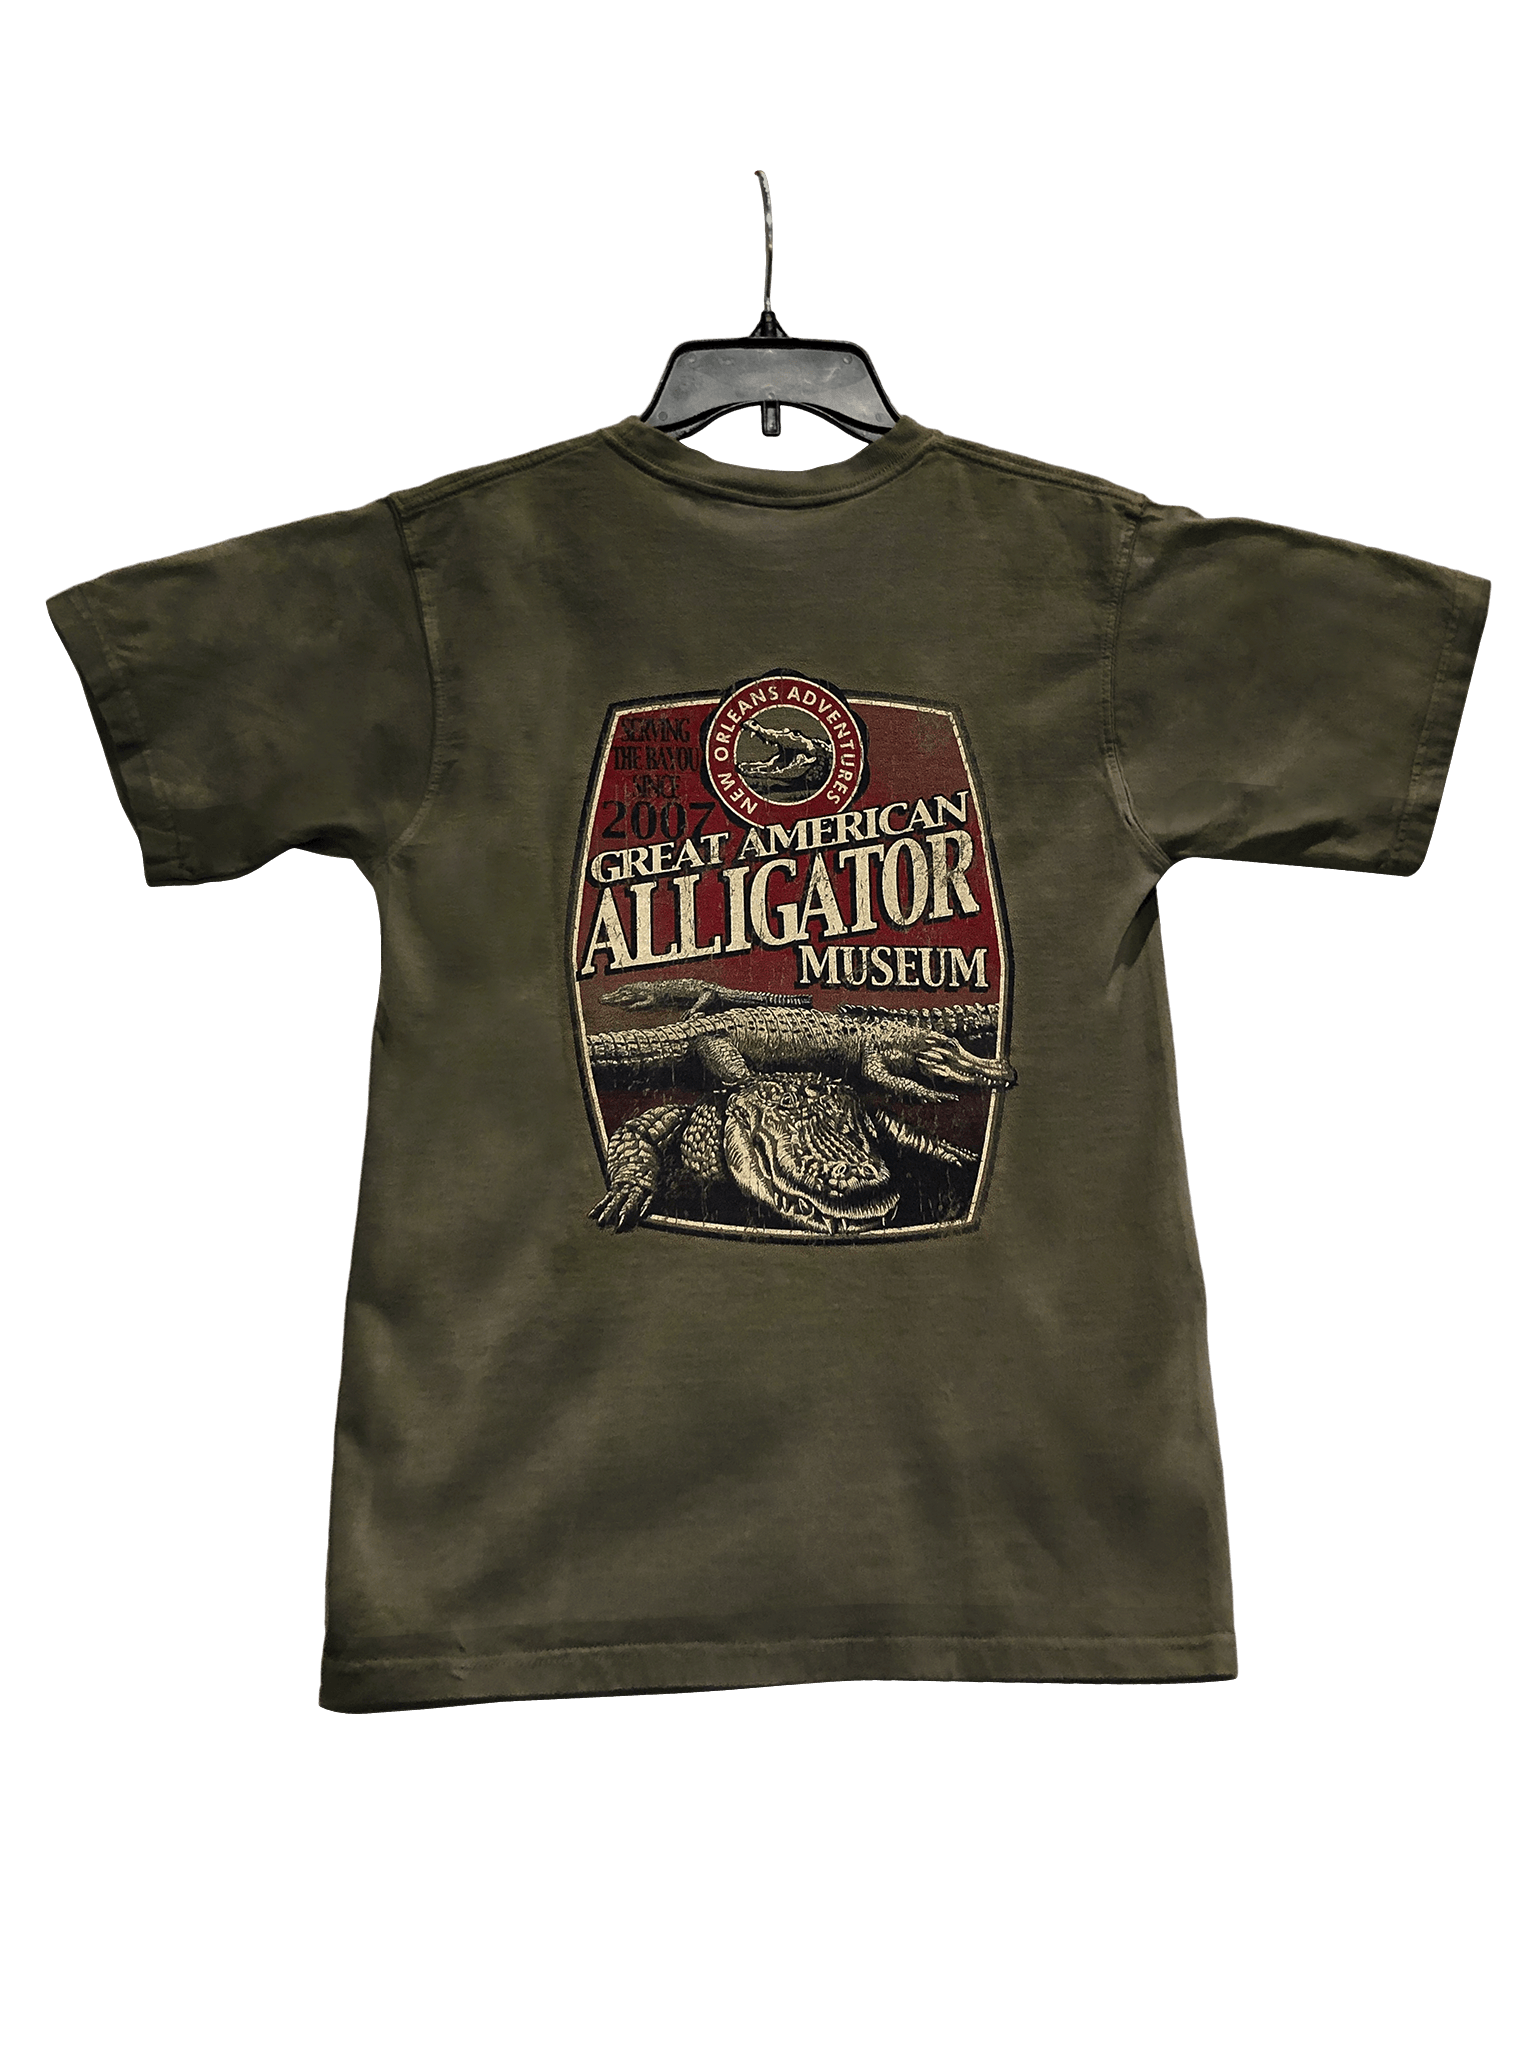 Classic Est. 2007 Great American Alligator Museum T-Shirt (Adult) - Limited Sizes - Order Now!